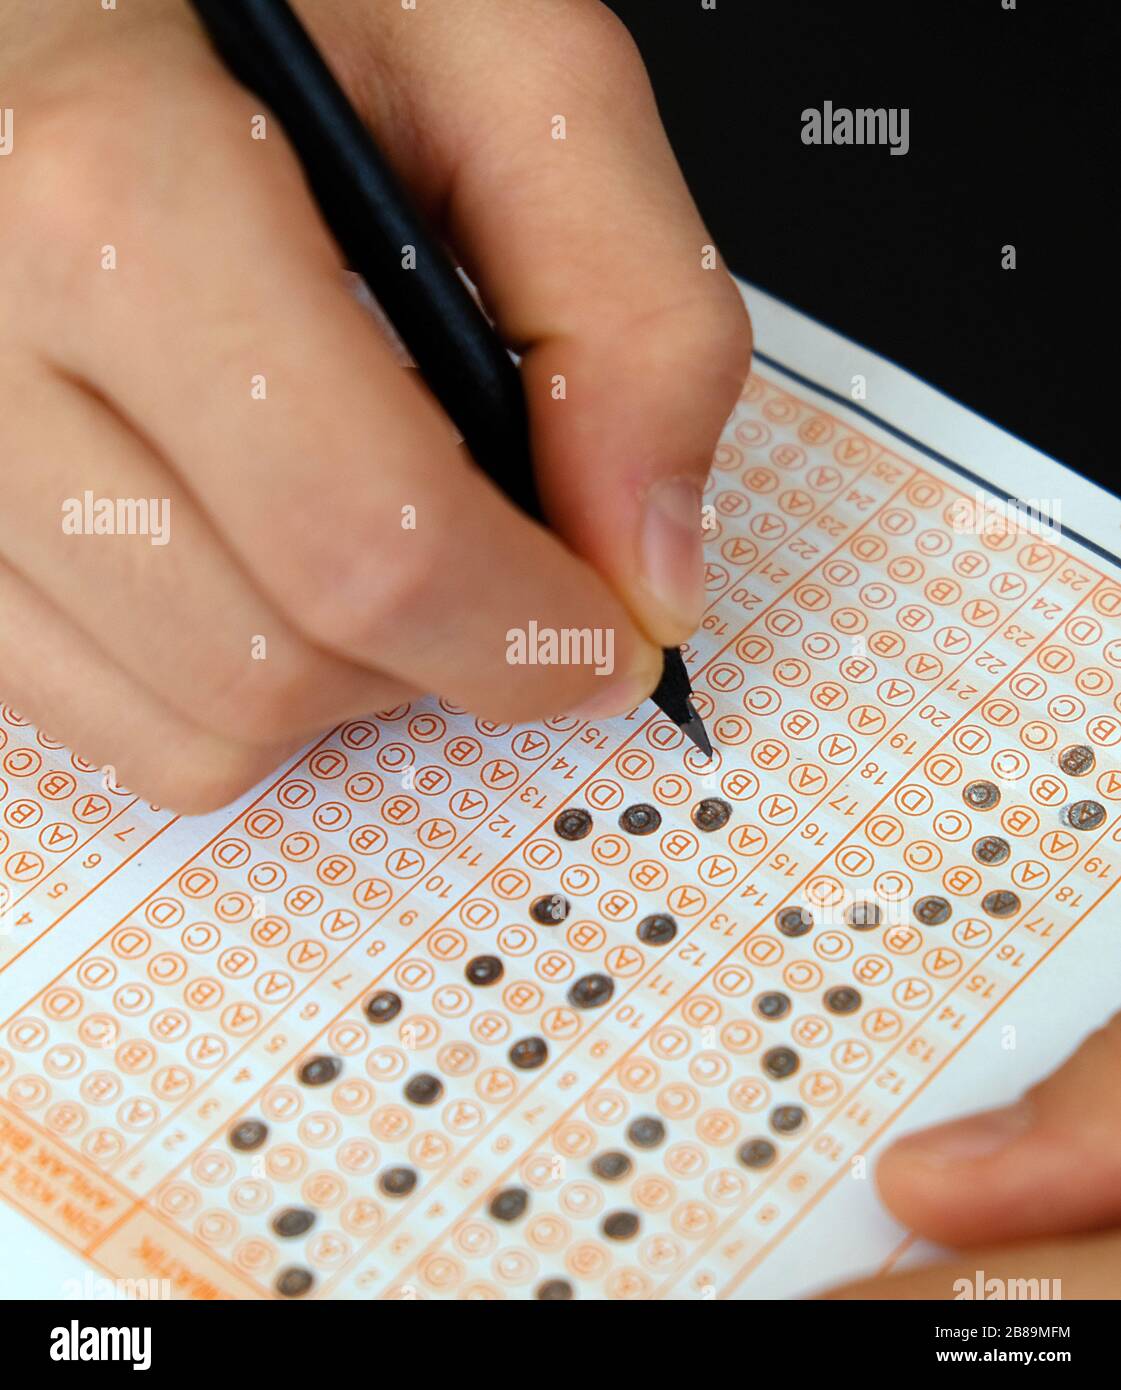 marking optical paper, marked question options and optical exam paper, Stock Photo